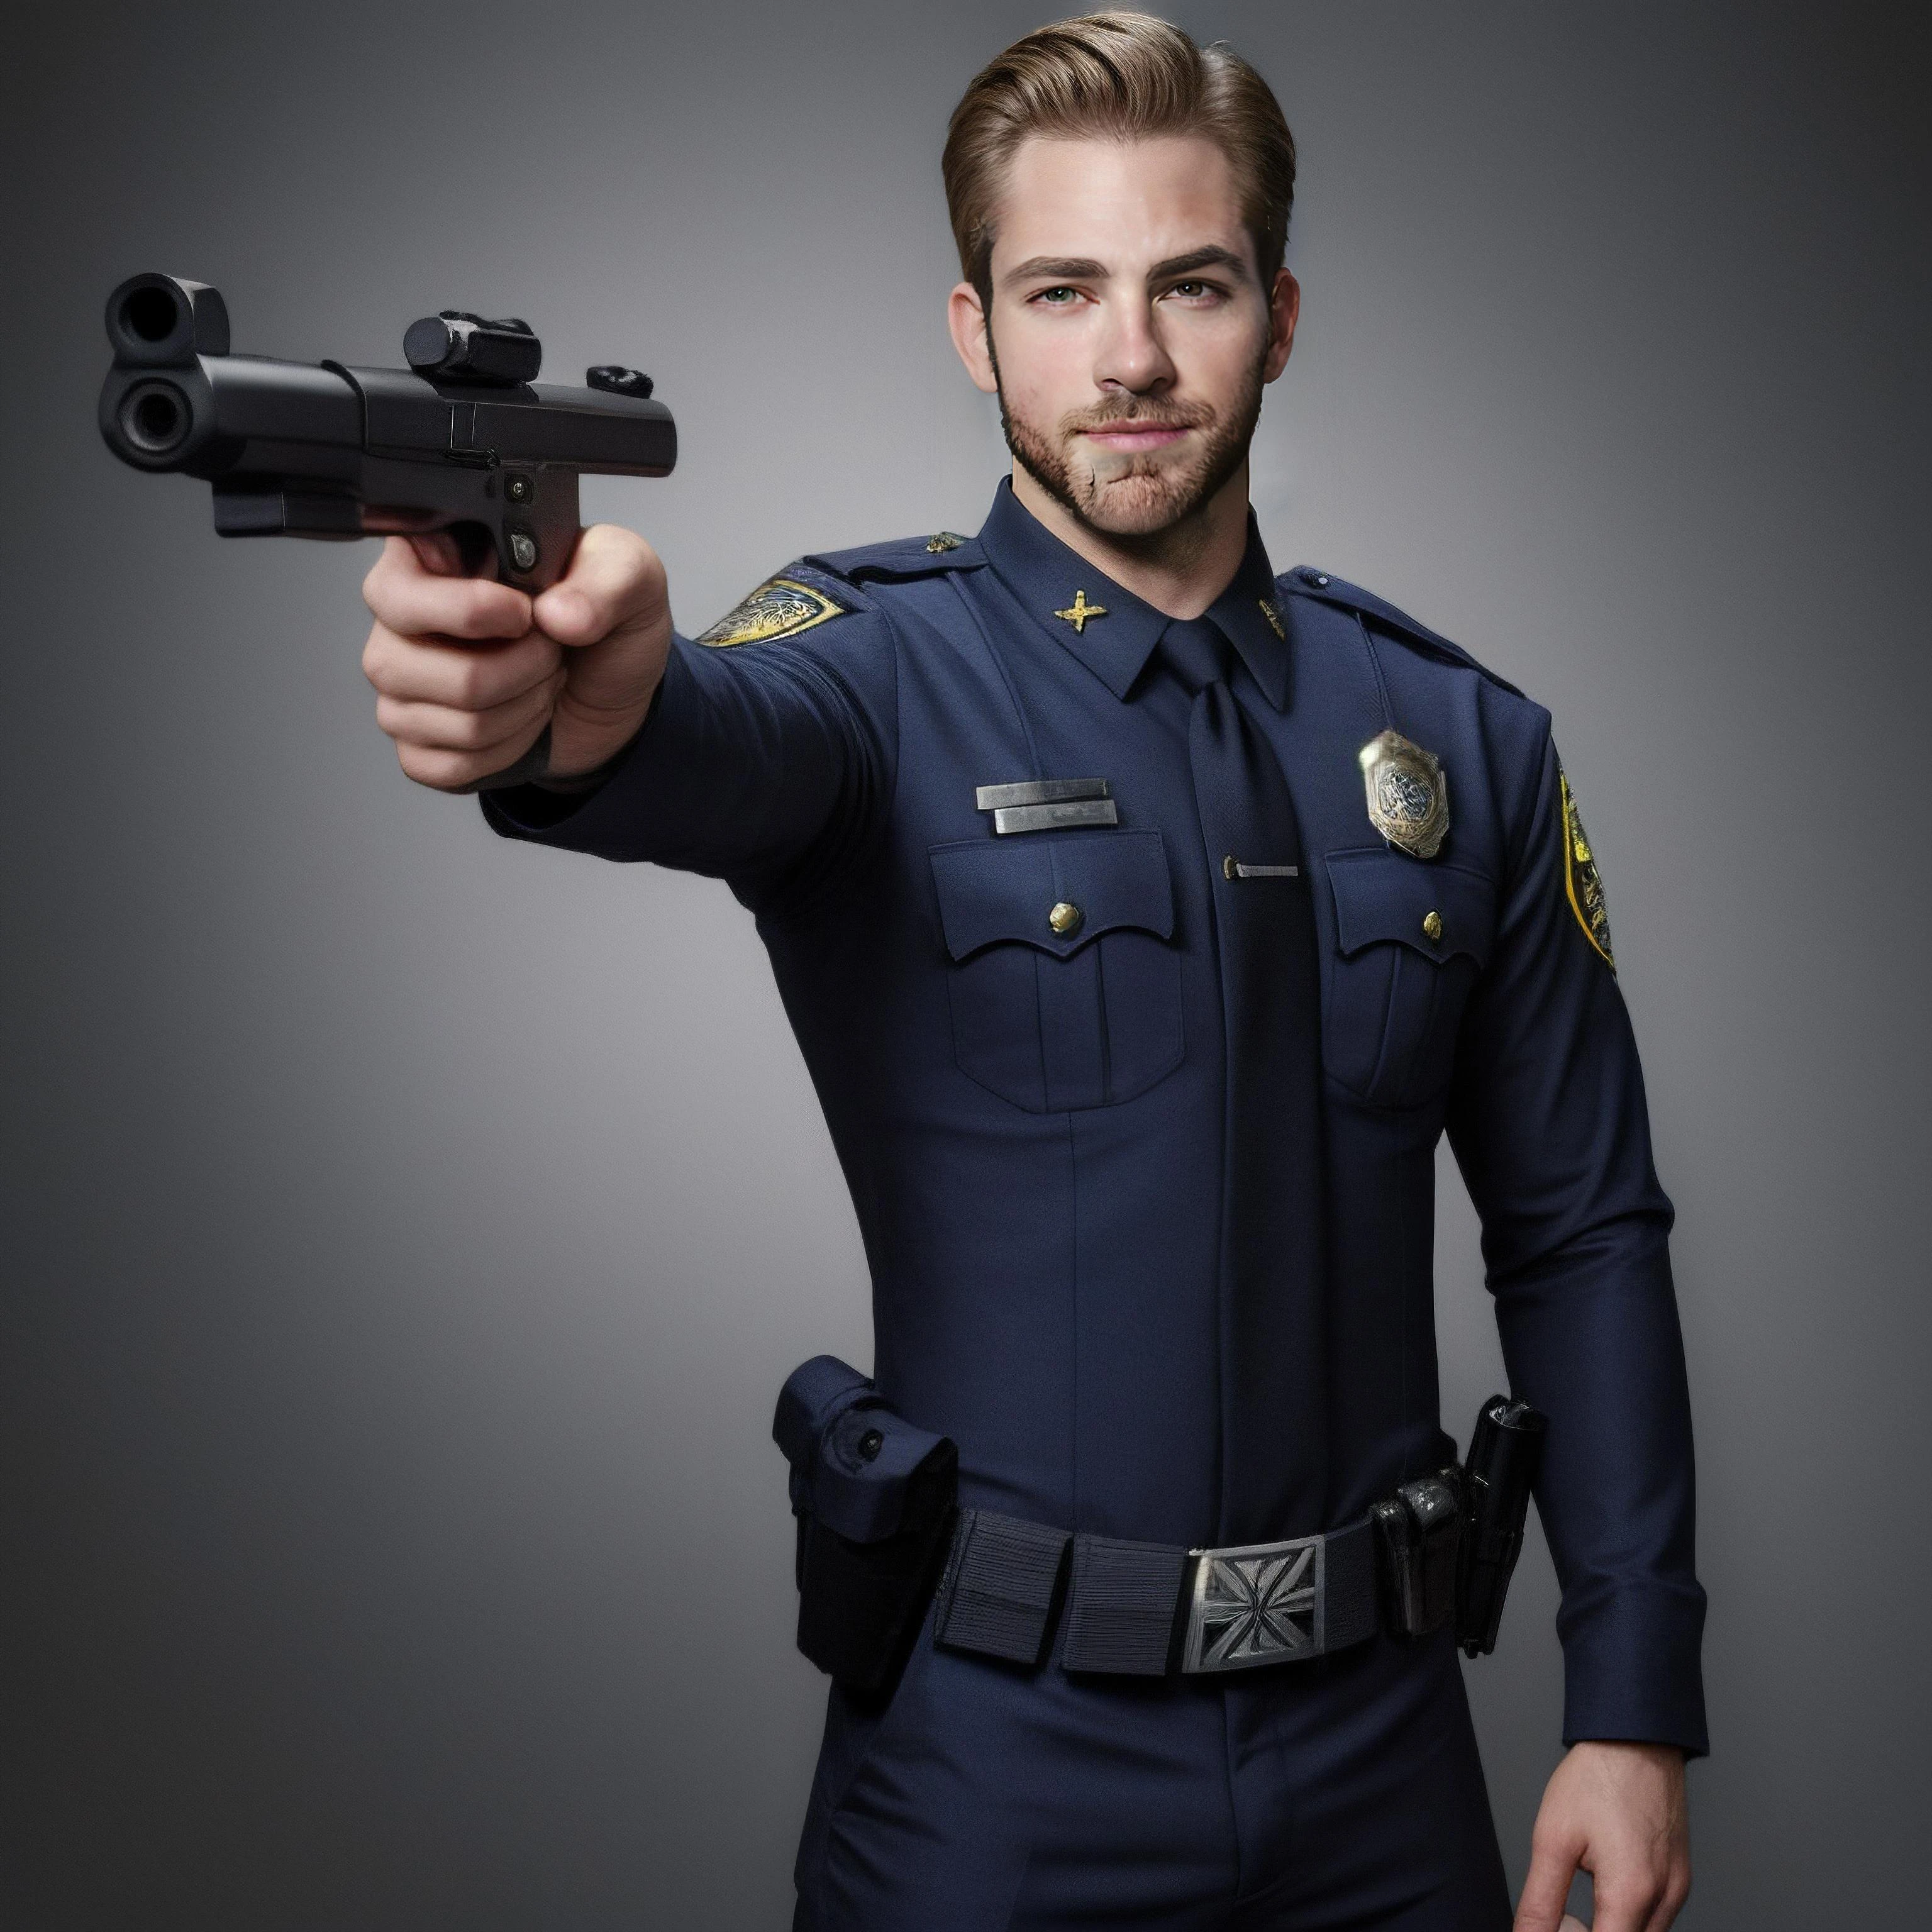 Chris Pine, face, male, body, police outfit, gun on waist, pointing forward, police pose